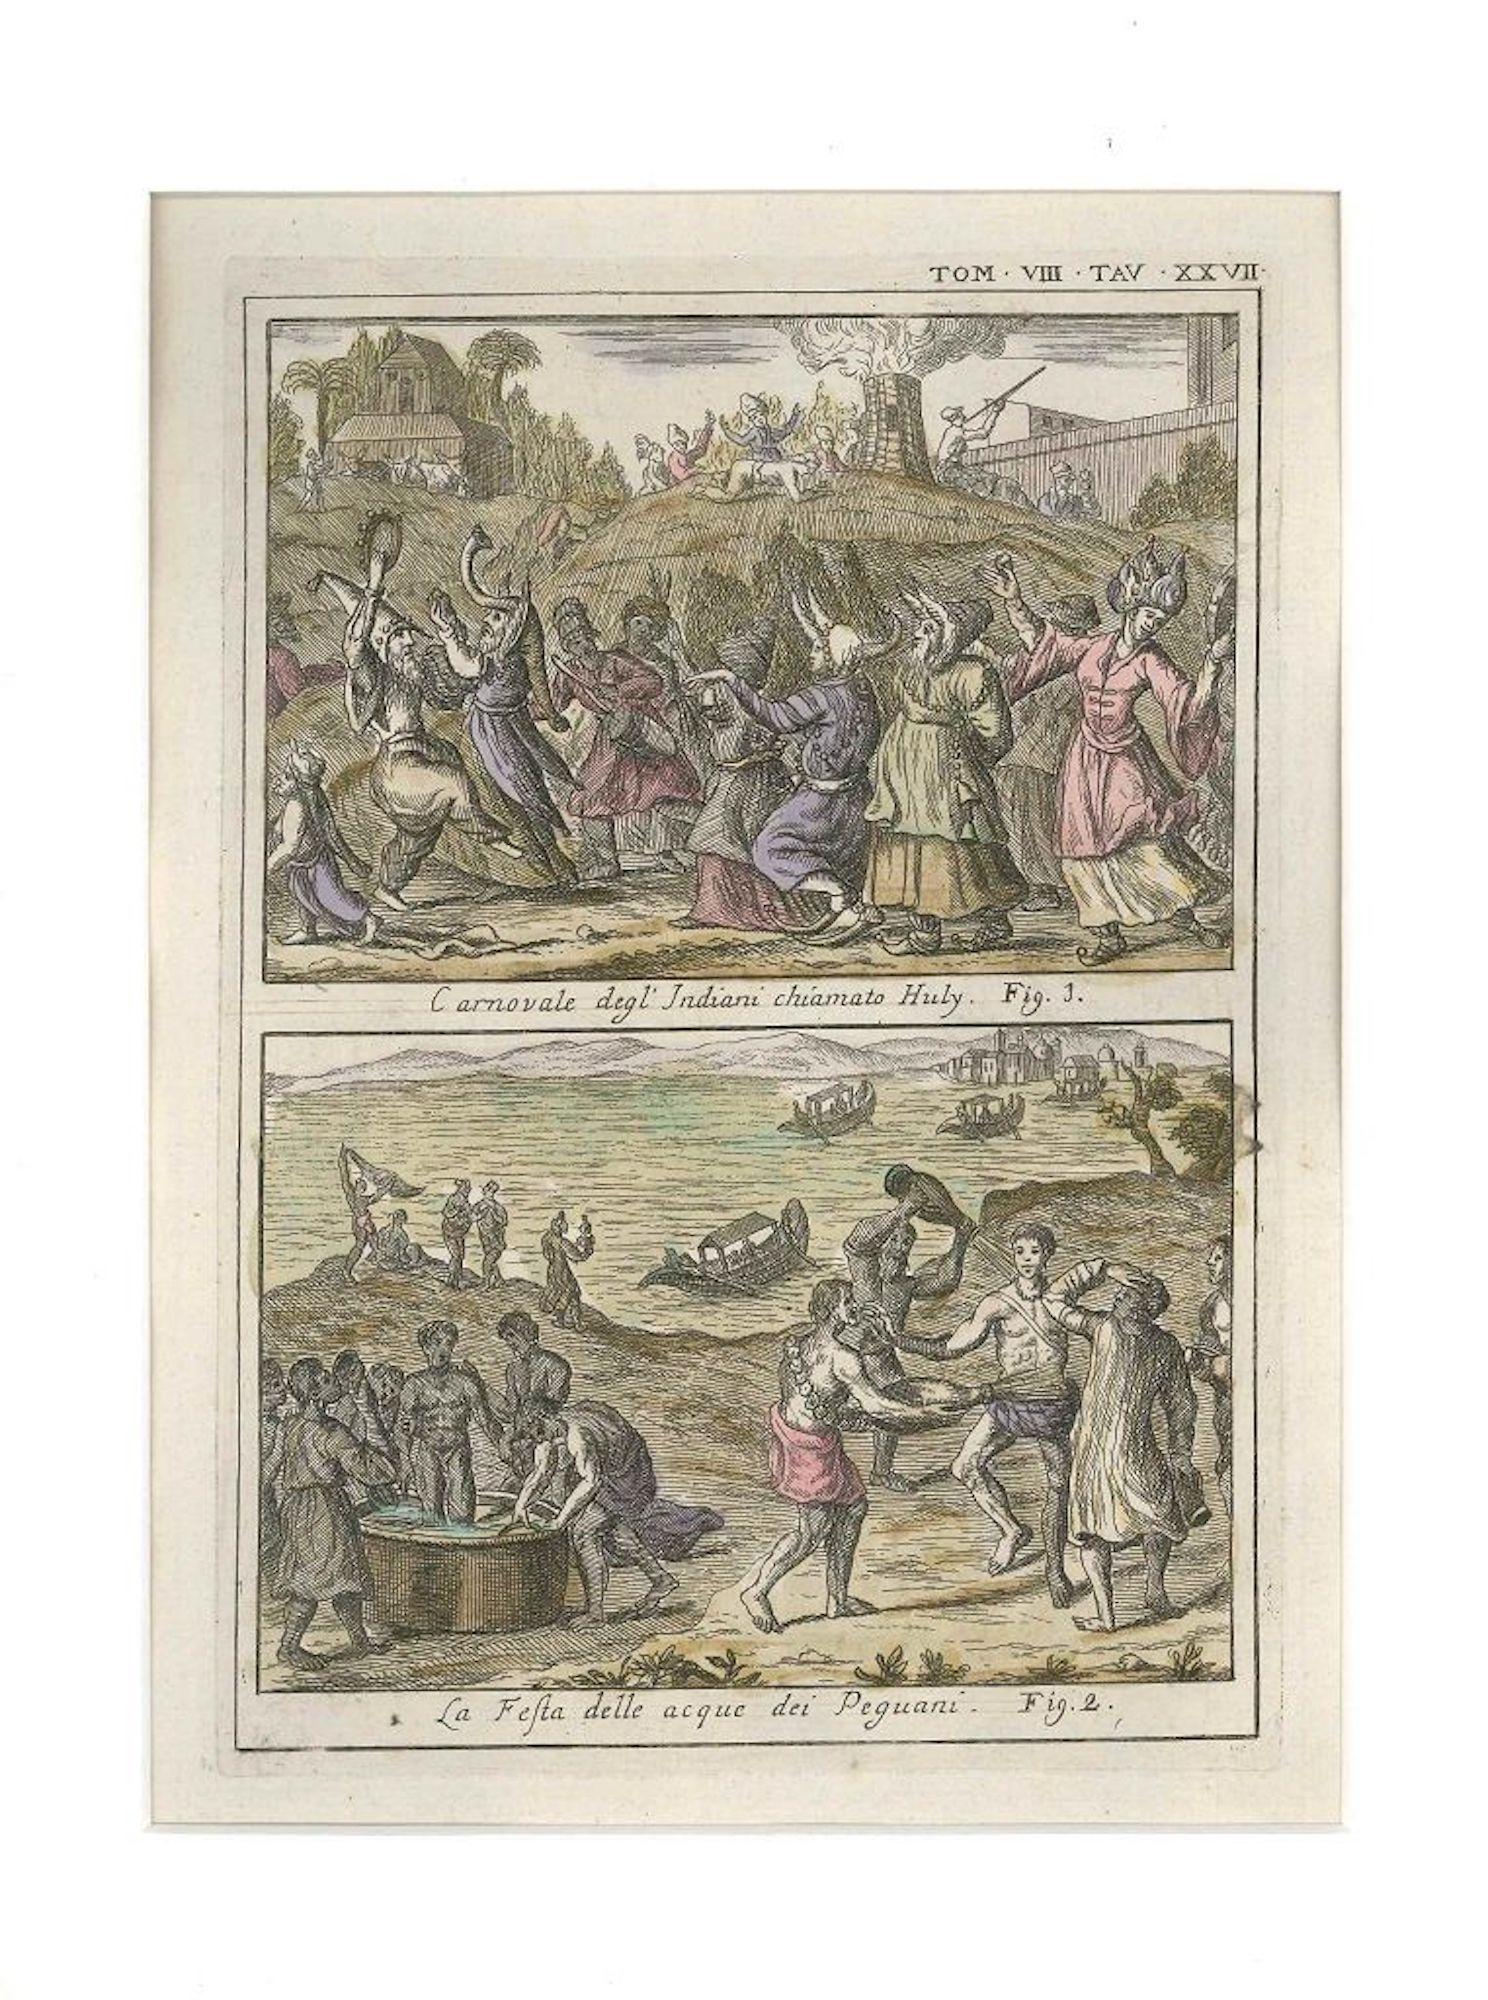 Huly Carnival and Water Party - Etching by G. Pivati - 1746/1751 - Print by Gianfrancesco Pivati